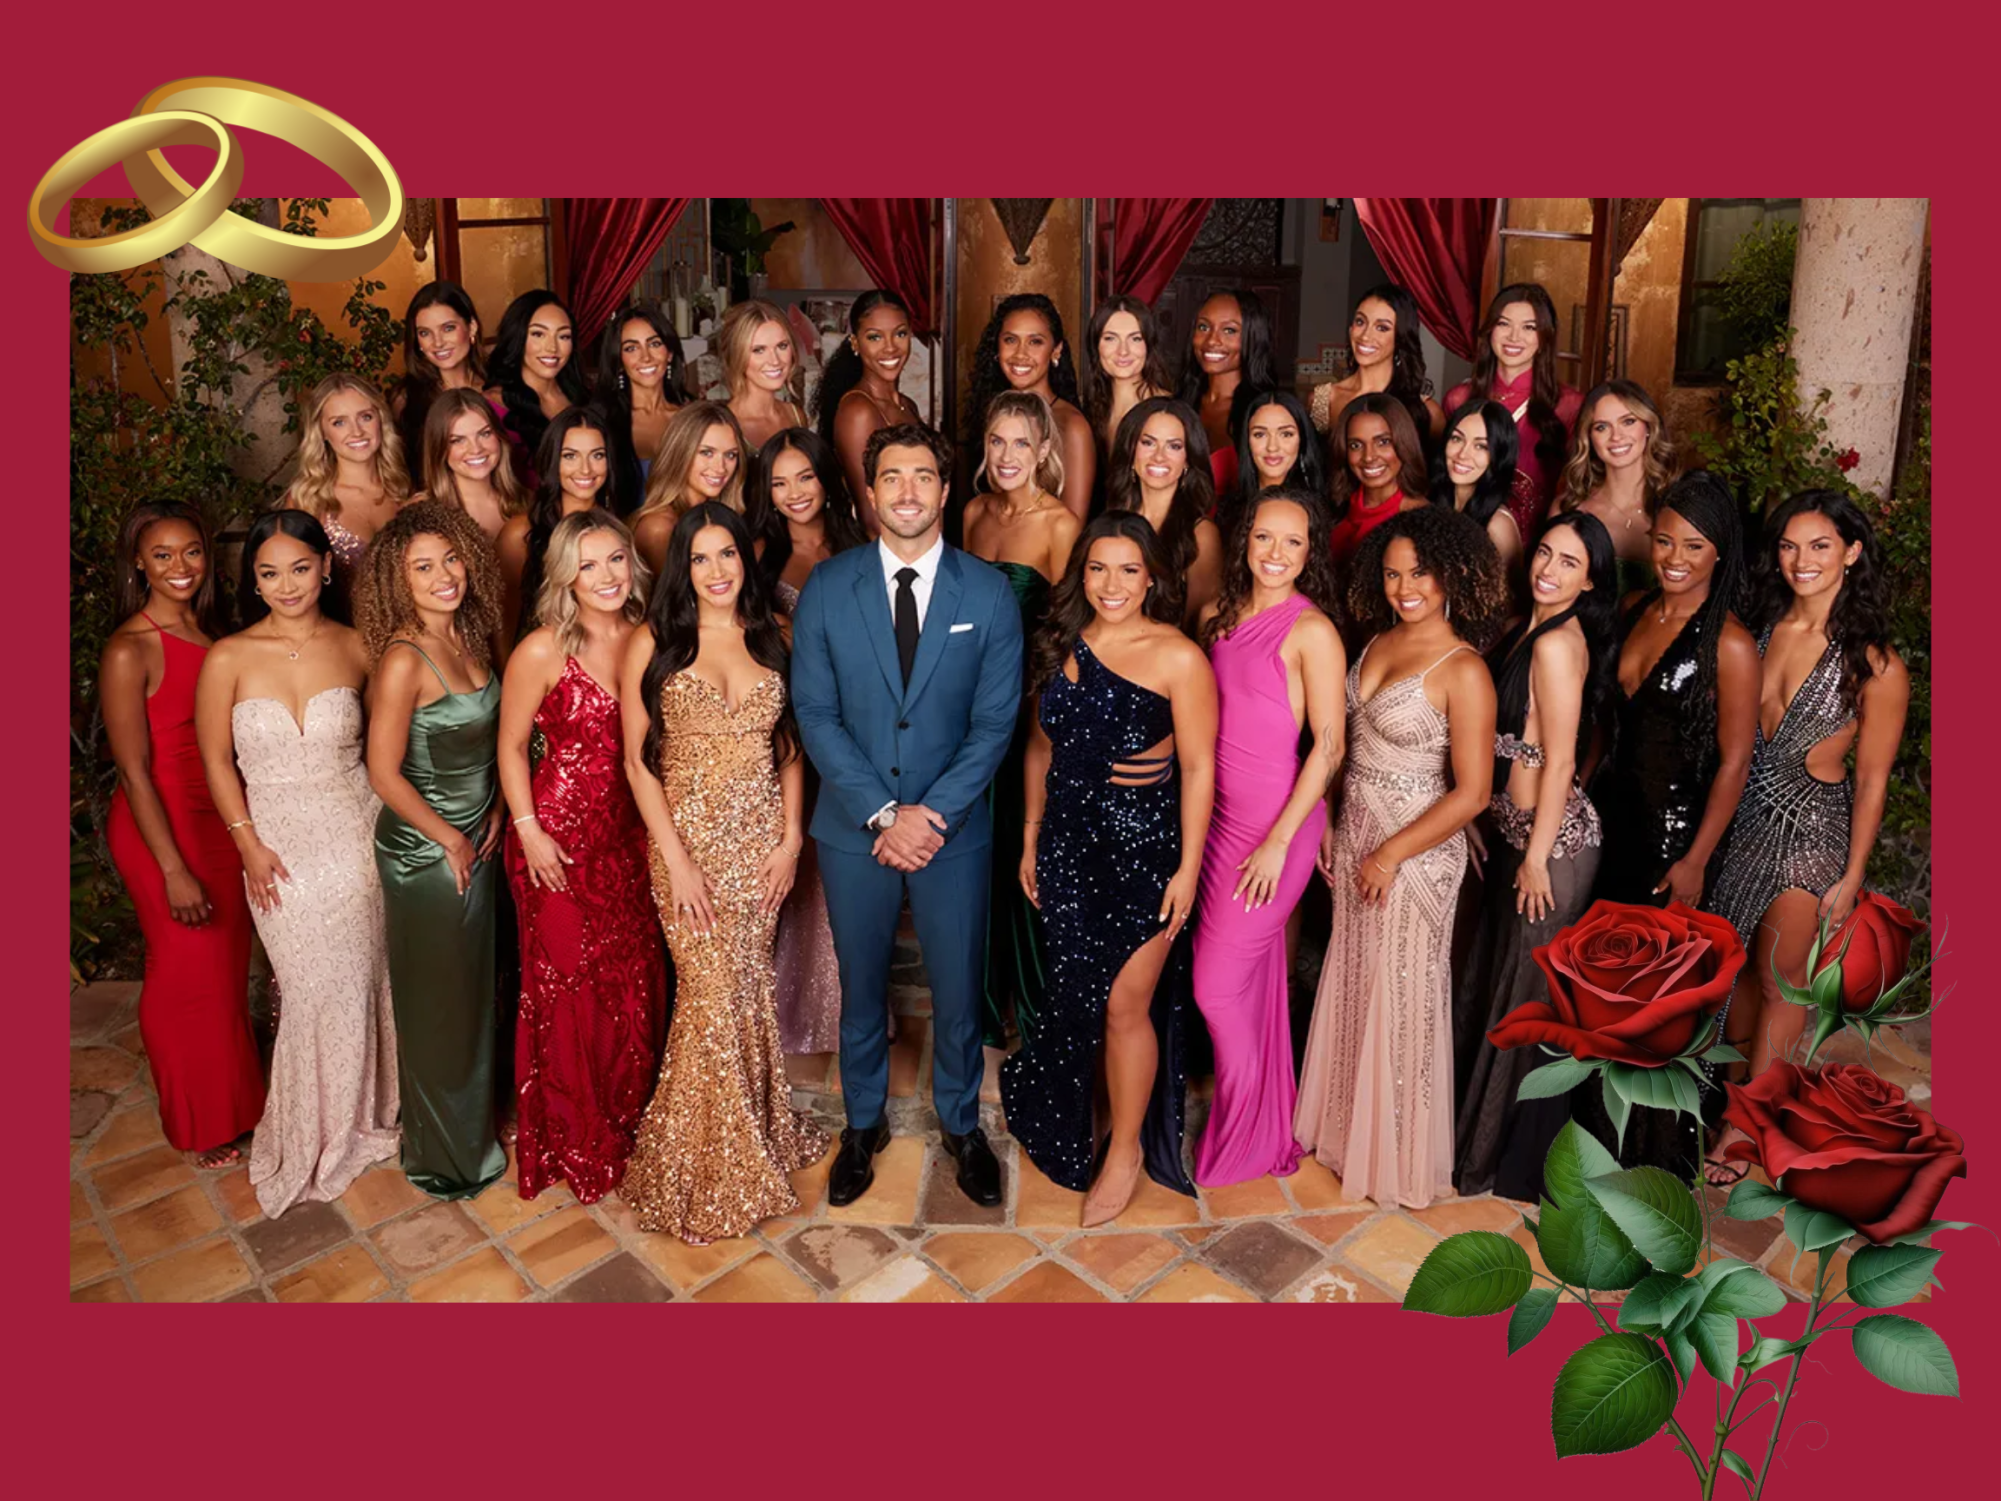 Charmingly, vulnerably and quickly, season 28 of “The Bachelor  has essentially reignited a spark for the 22-year franchise. From engaging plotlines to a relatable lead in Joey Graziadei, fans have fallen head over heels all over again with Bachelor Nation. As the season finale looms, audiences can not wait to witness the heart throbbing lead find love right in front of their eyes. 